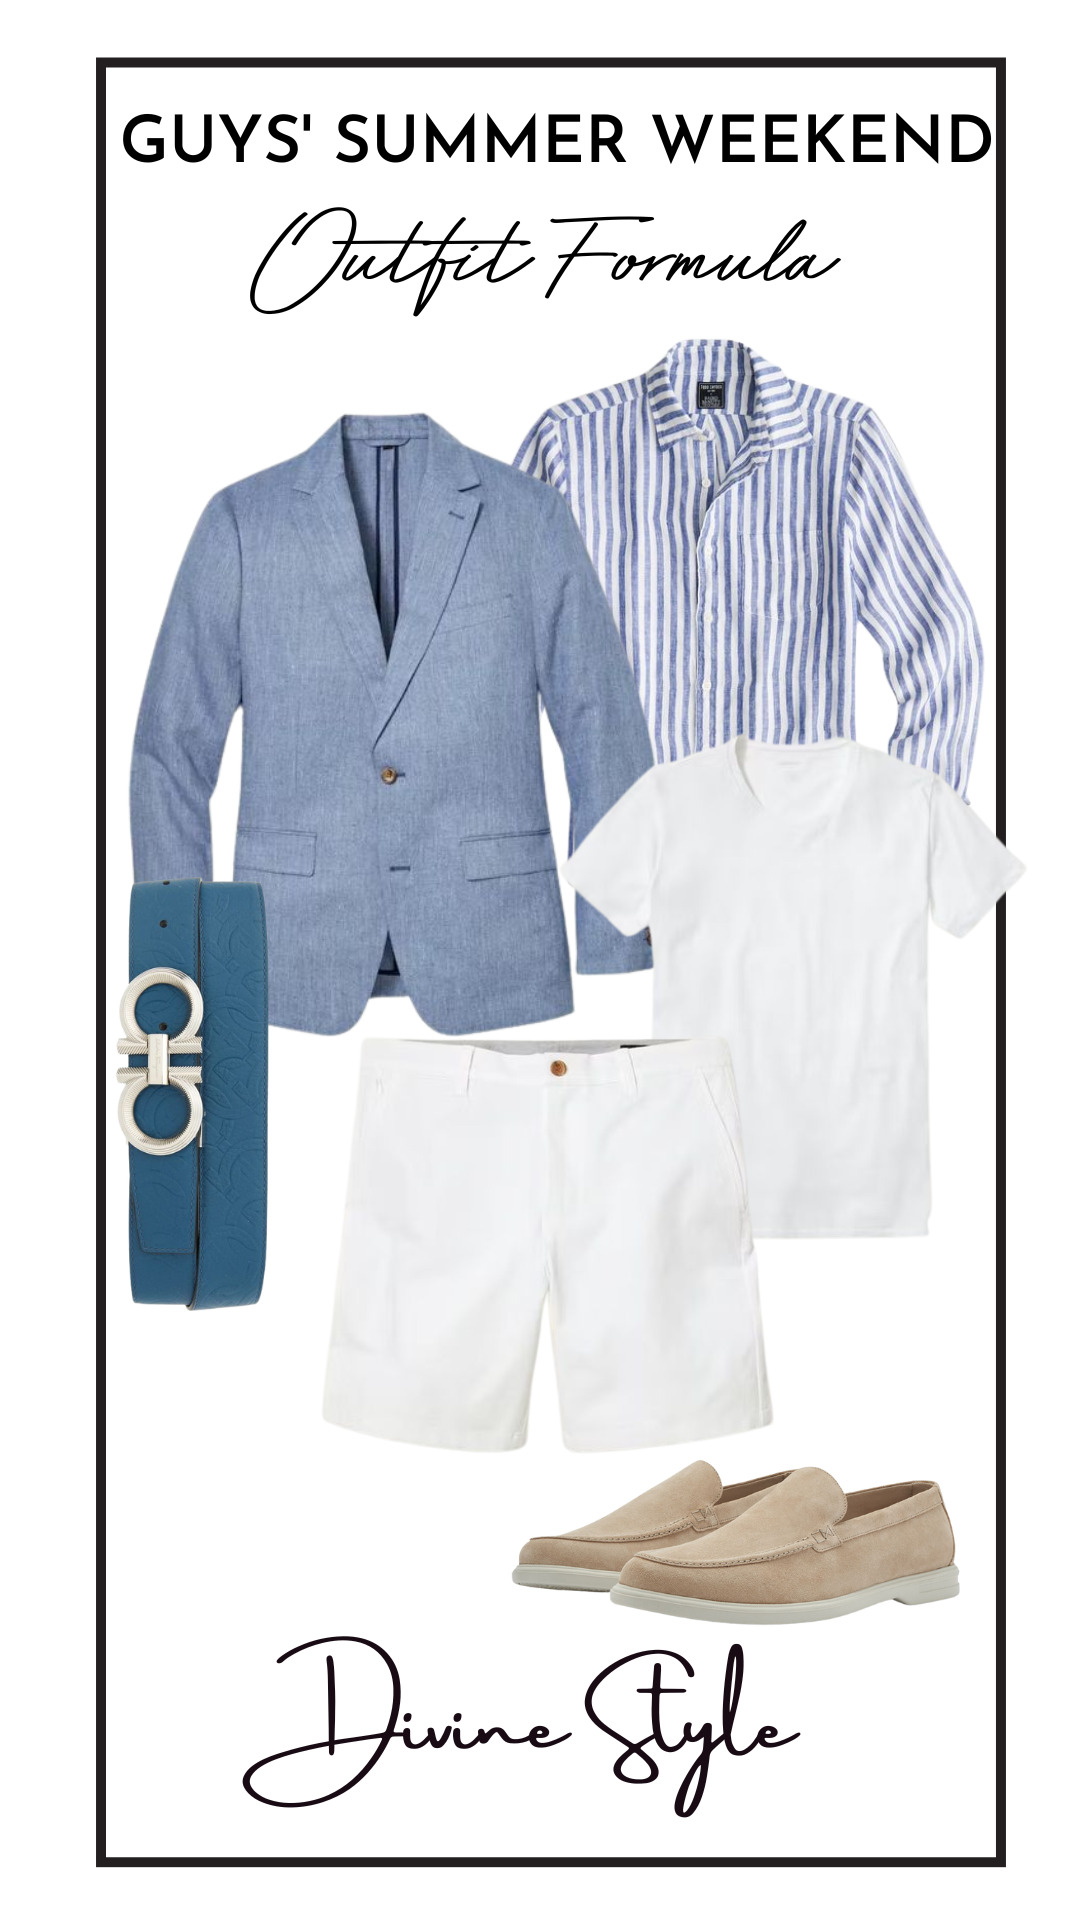 Guys' Summer Weekend Outfit Formulas, men's summer sport coat and shorts outfit